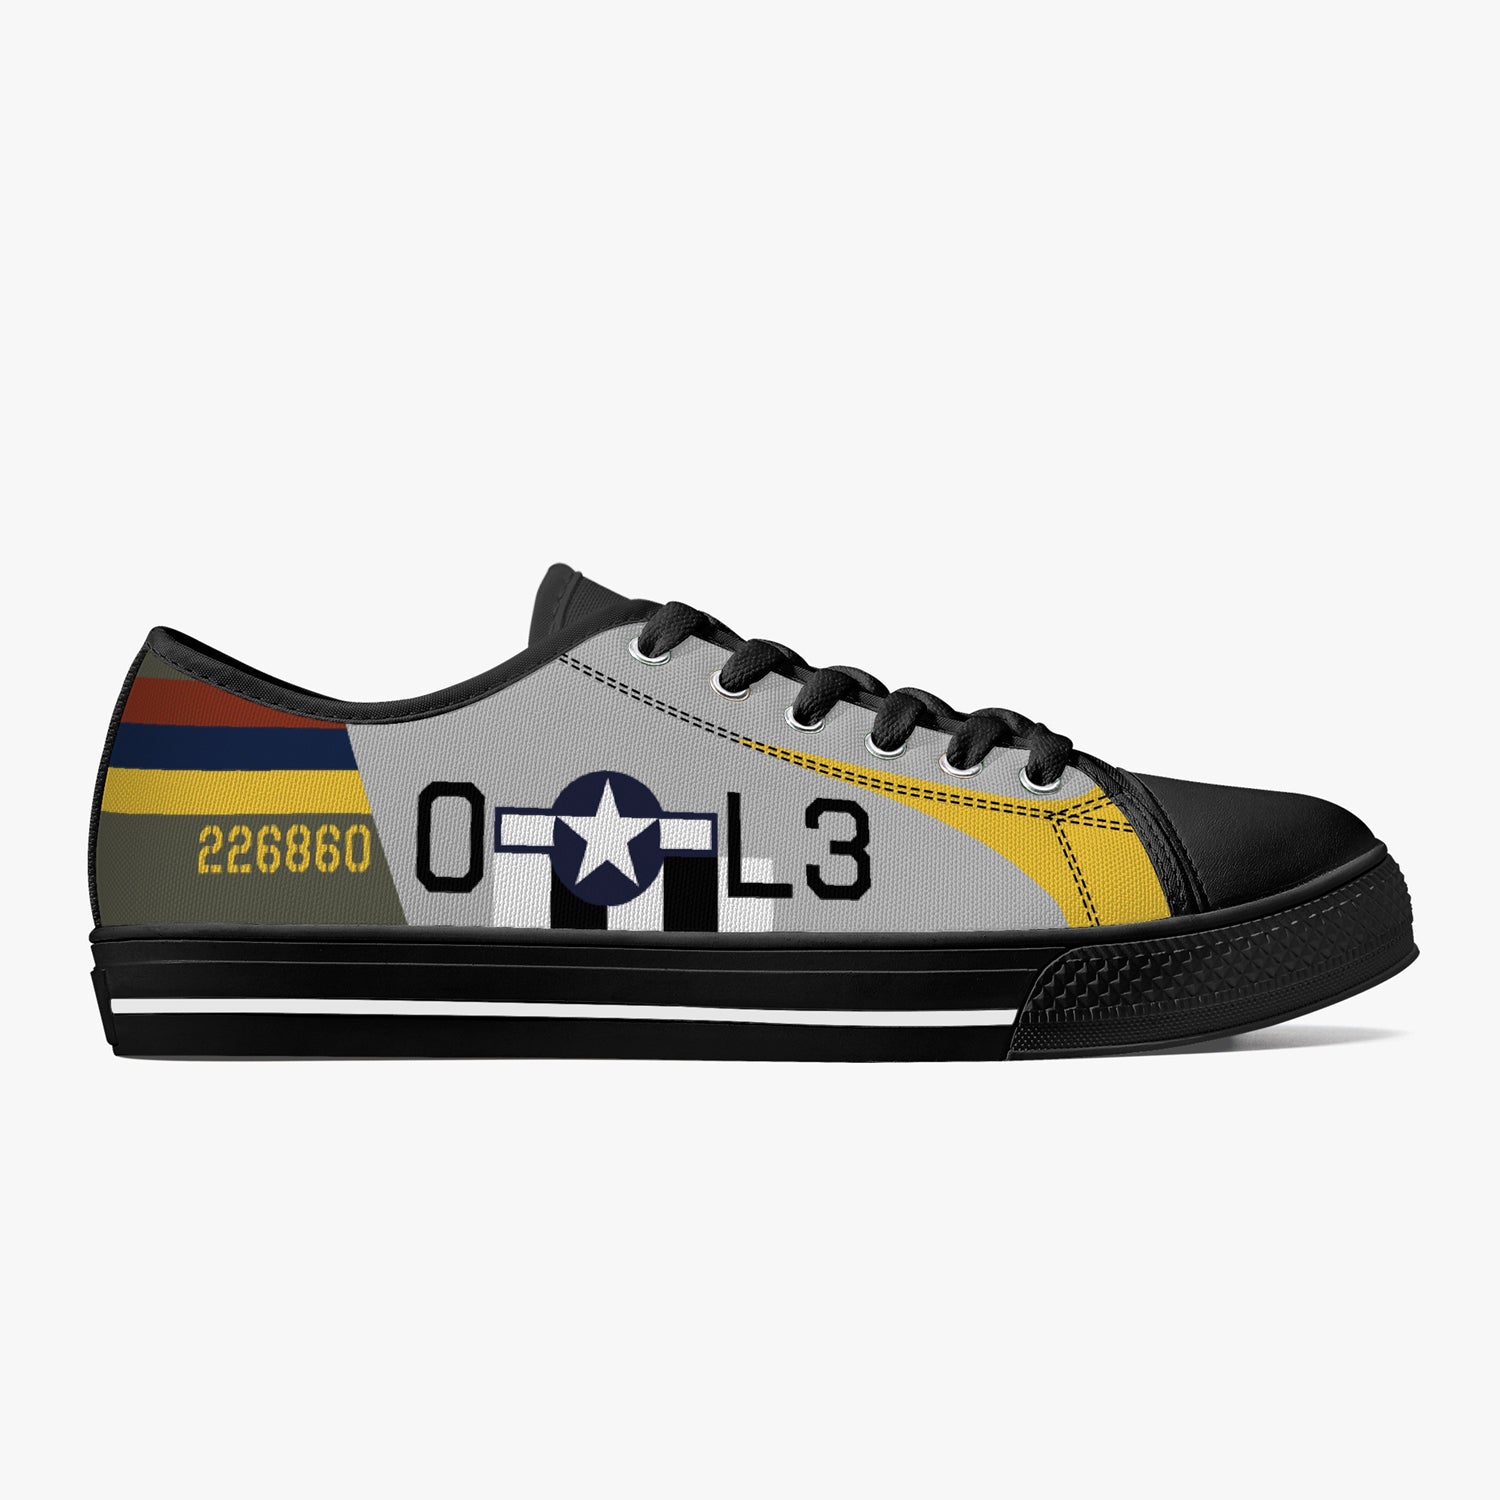 P-47 "Angie" Low Top Canvas Shoes - I Love a Hangar